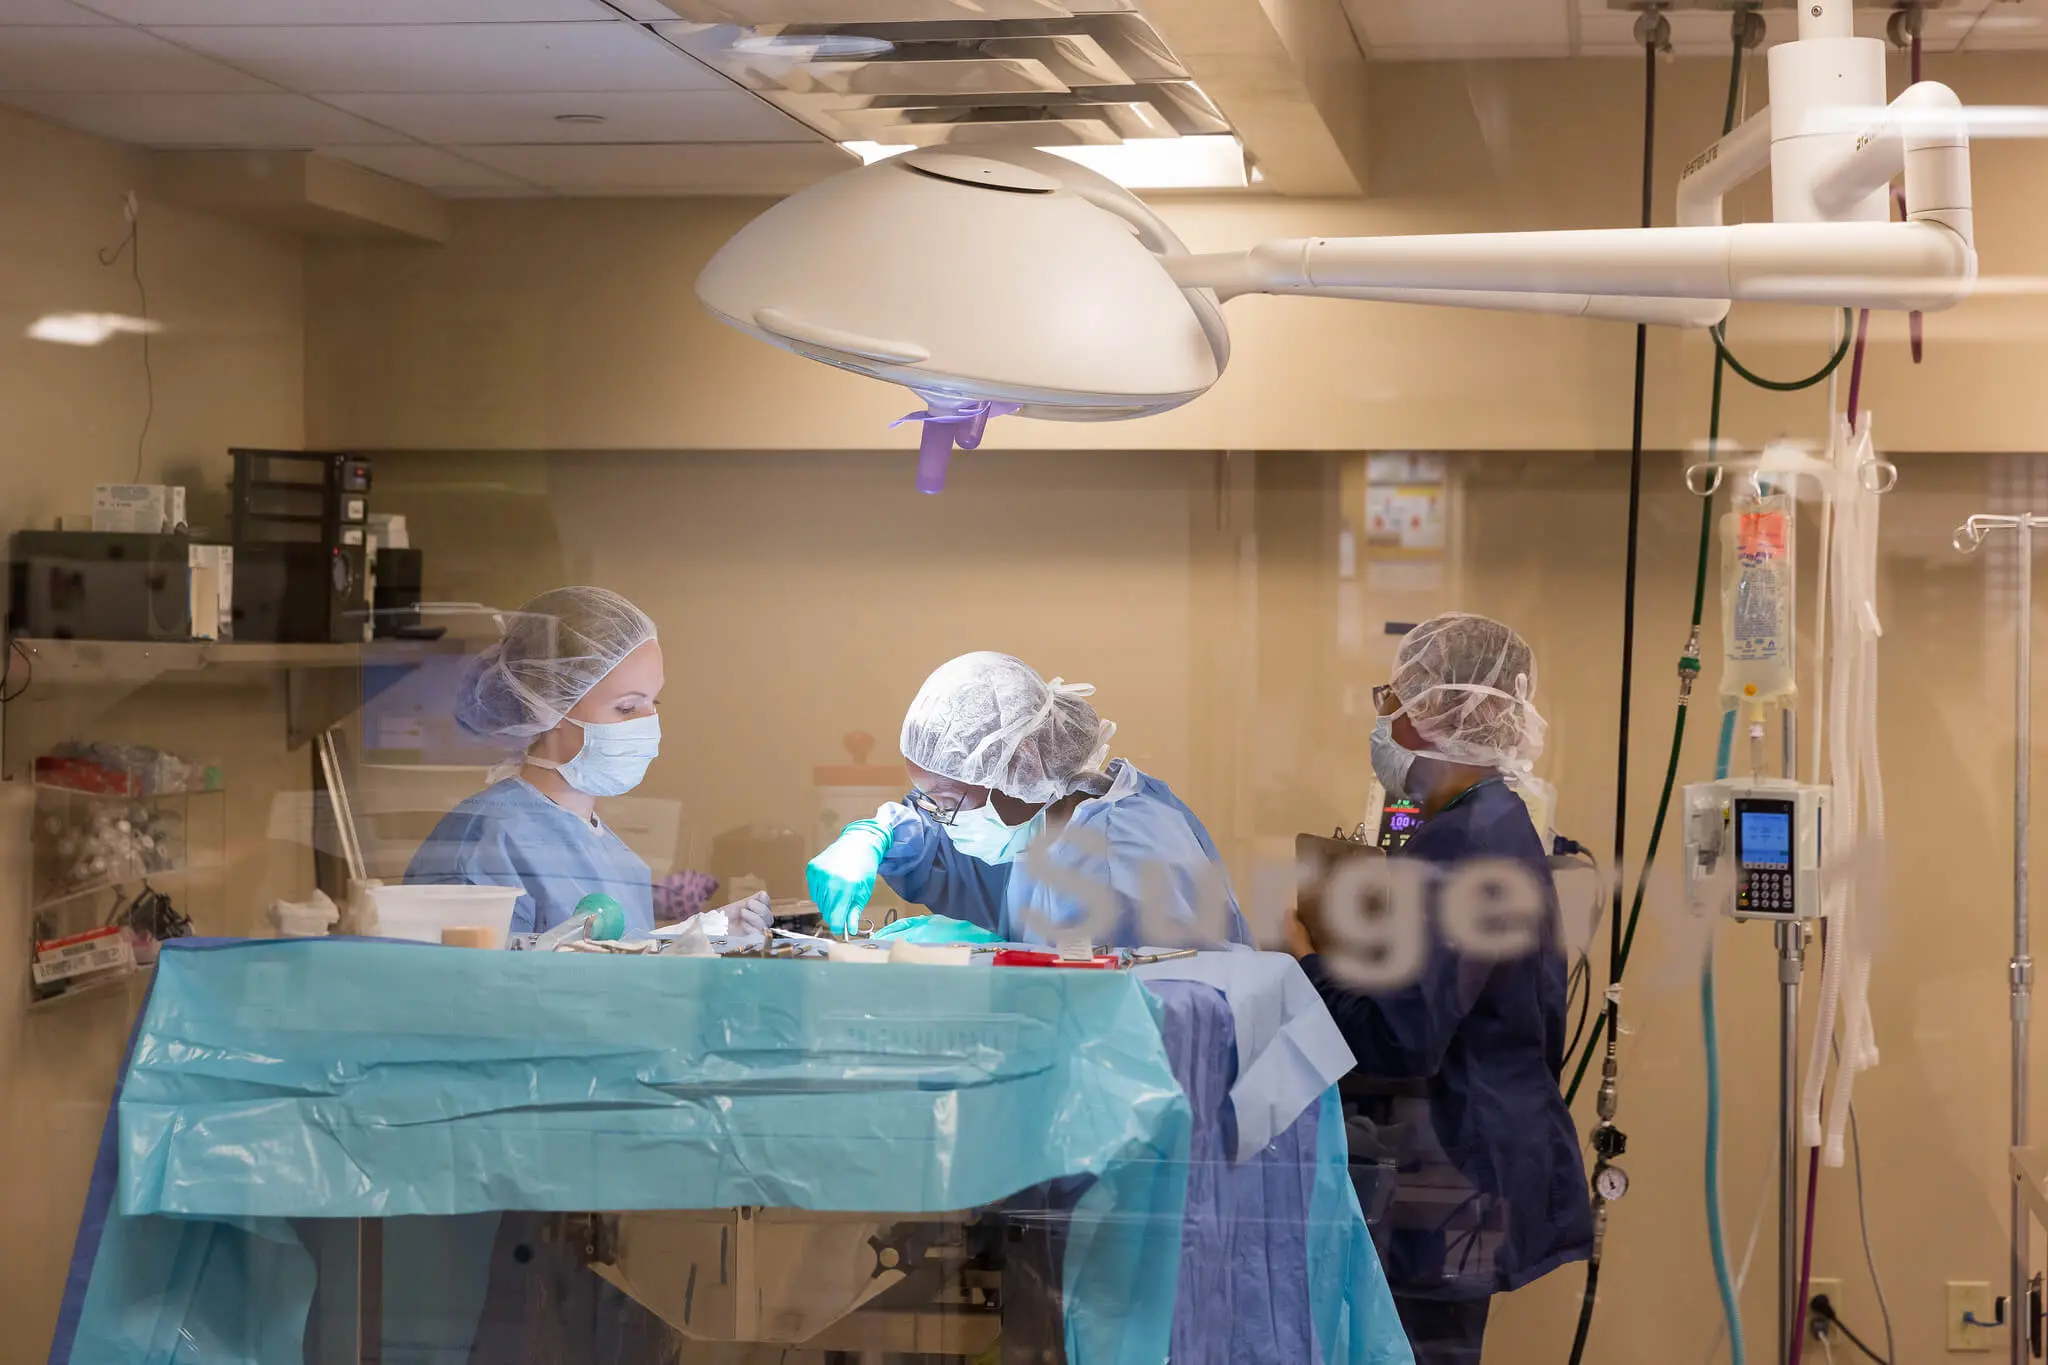 A team of veterinarians prepare tools in a surgery suite.